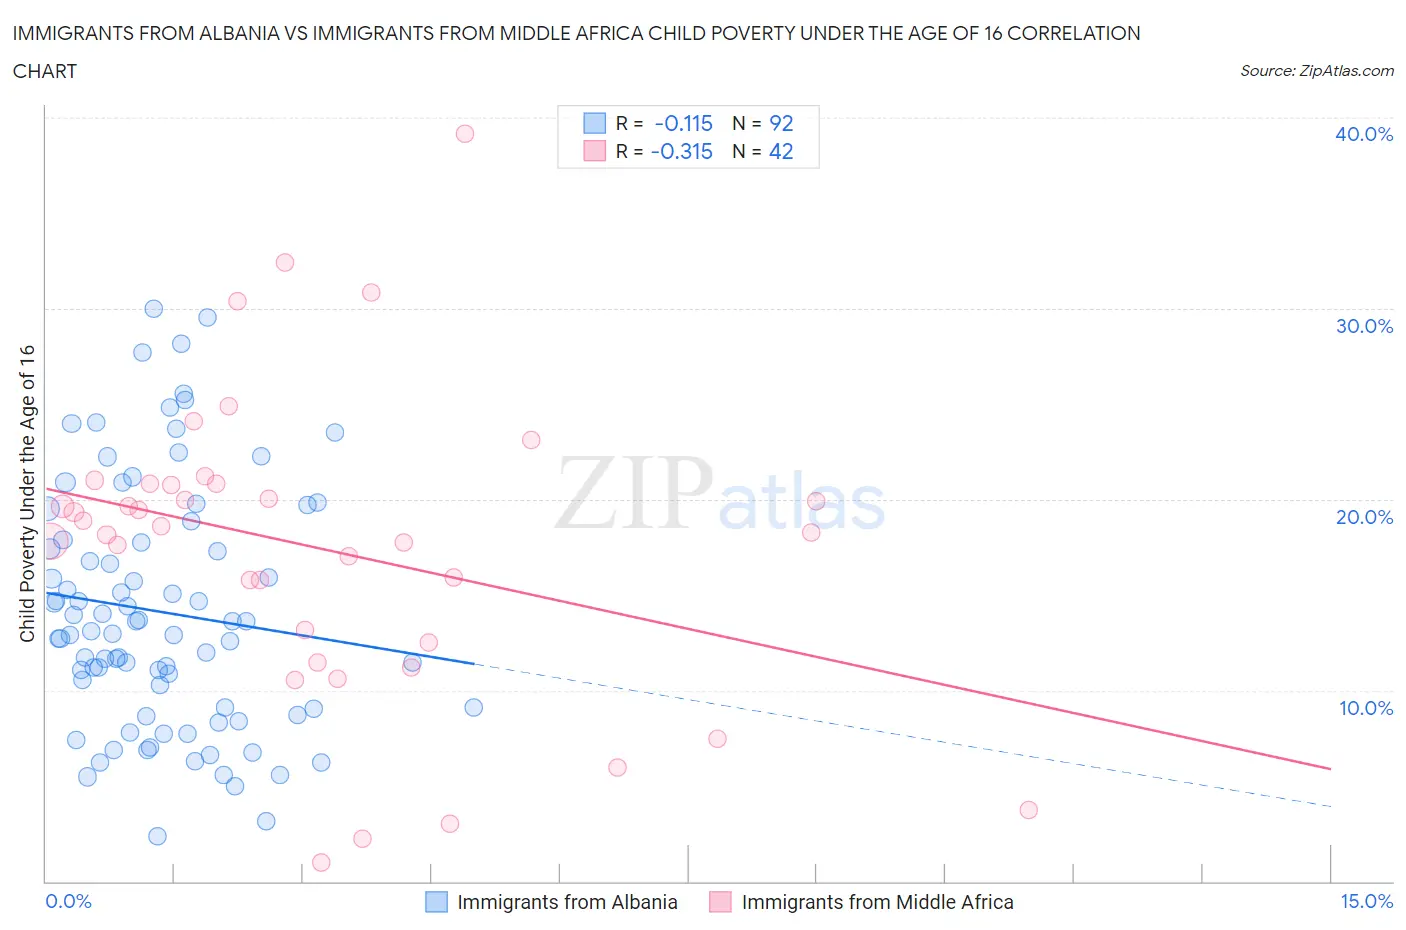 Immigrants from Albania vs Immigrants from Middle Africa Child Poverty Under the Age of 16